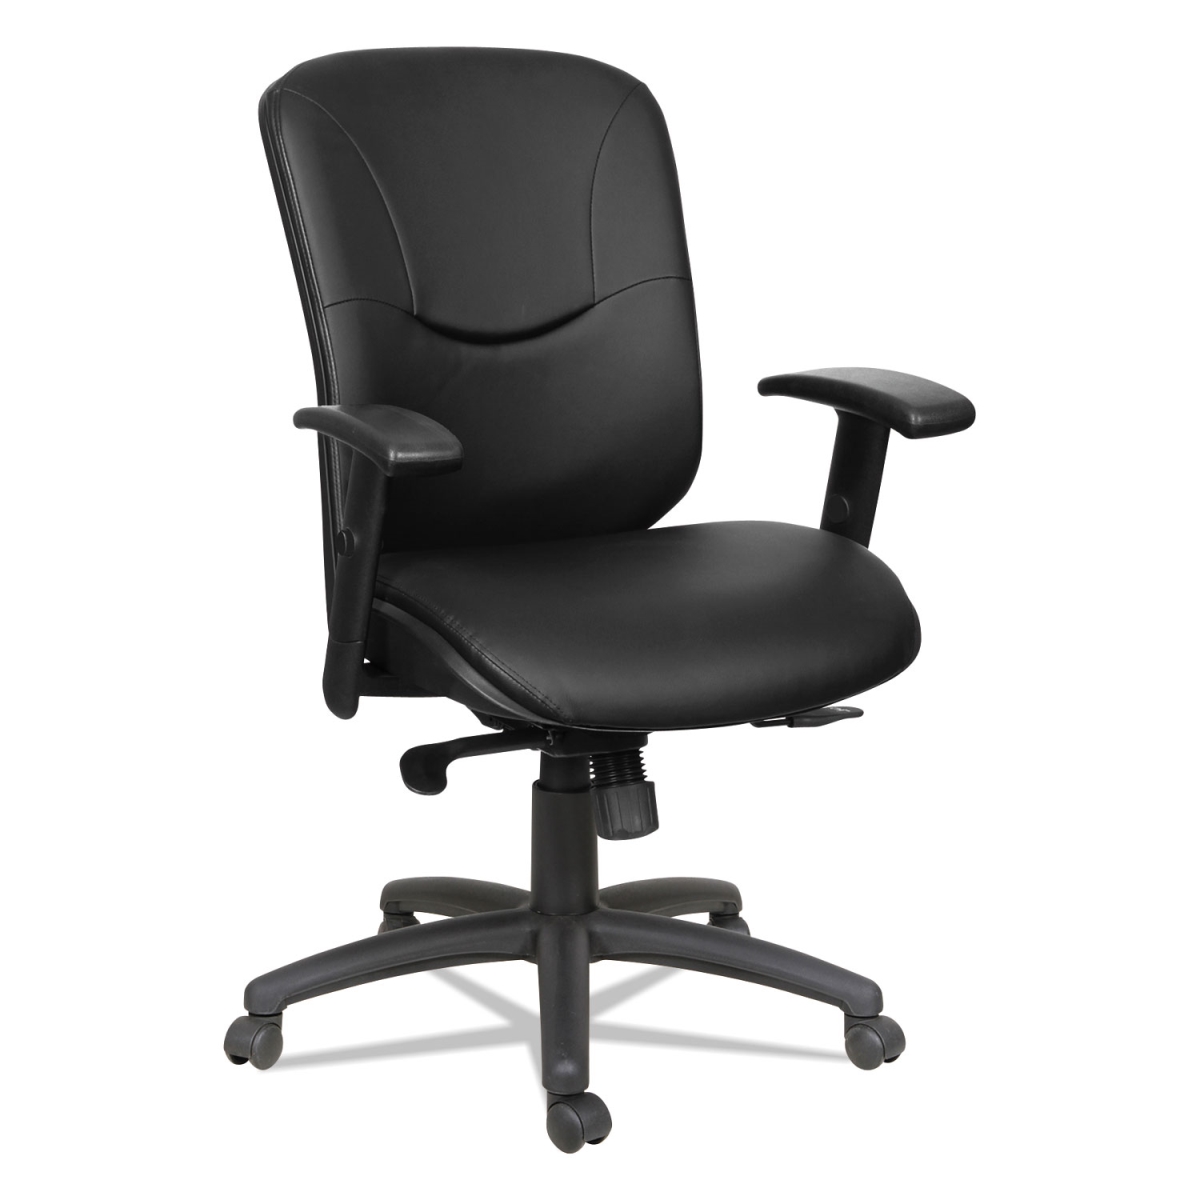 Alera Aleen4219 Eon Series Mid-back Leather Synchro With Seat Slide Chair, Black